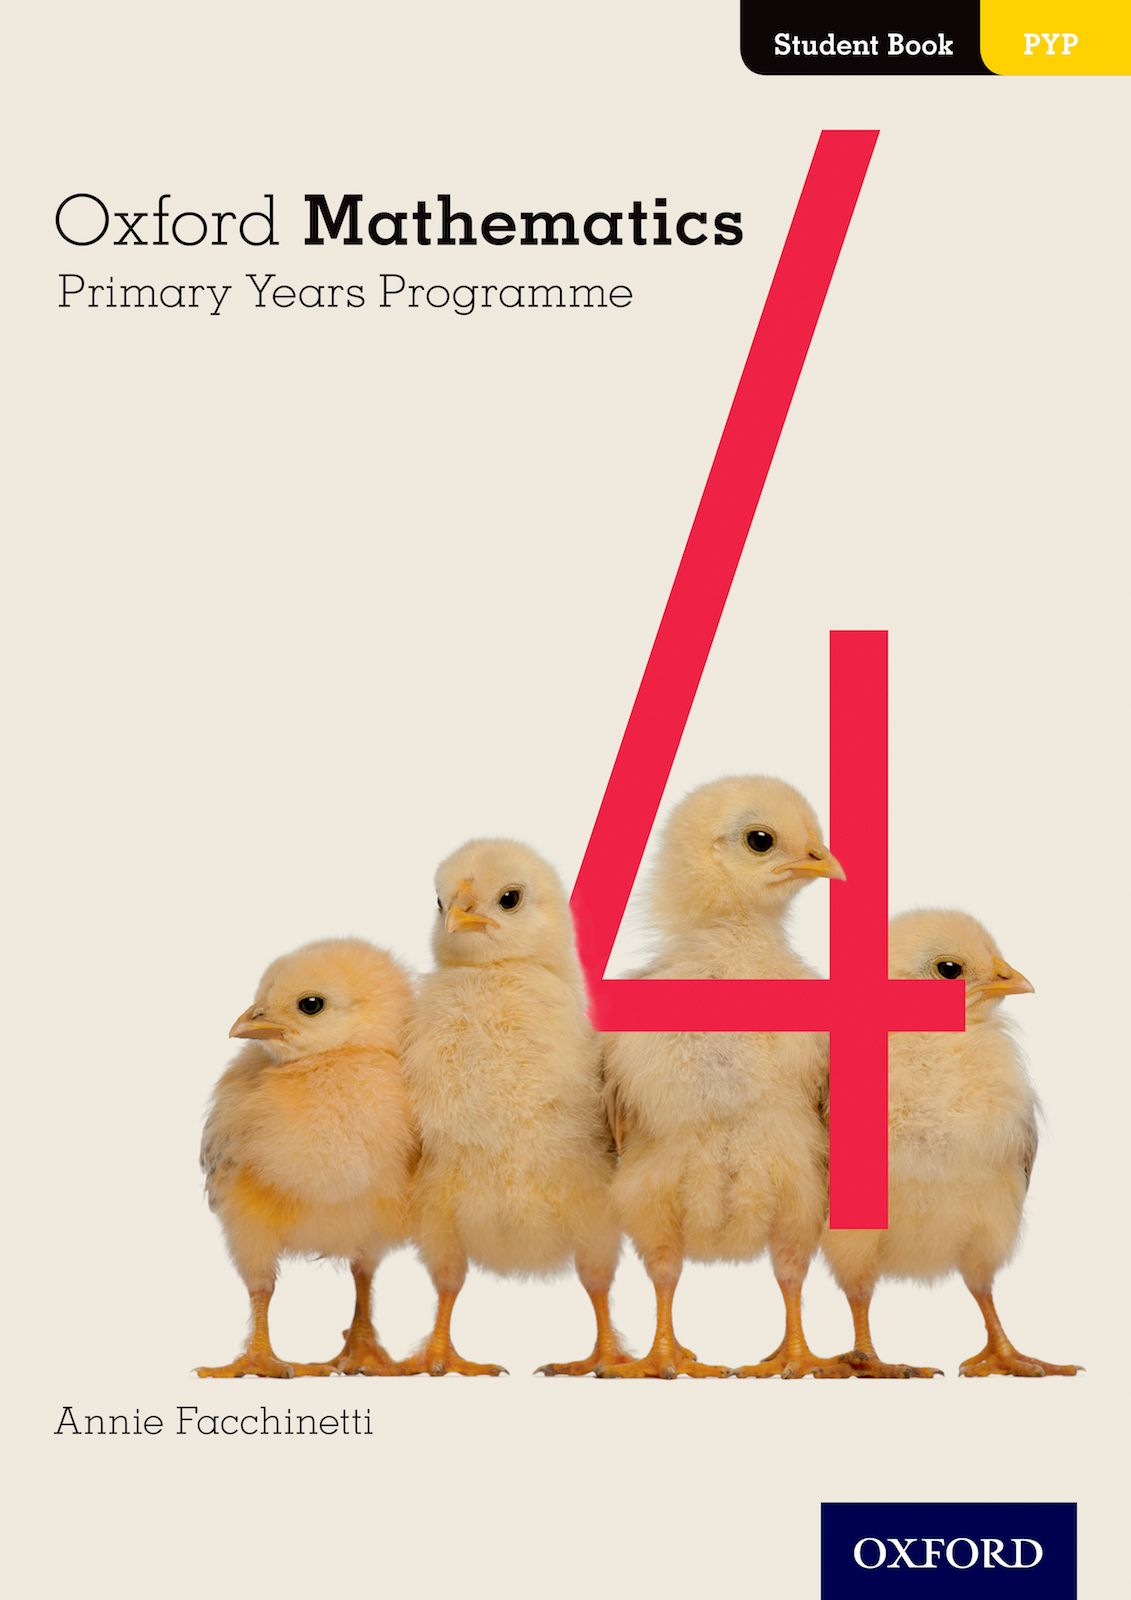 Featured image for “Oxford Mathematics Primary Years Programme Student Book 4”